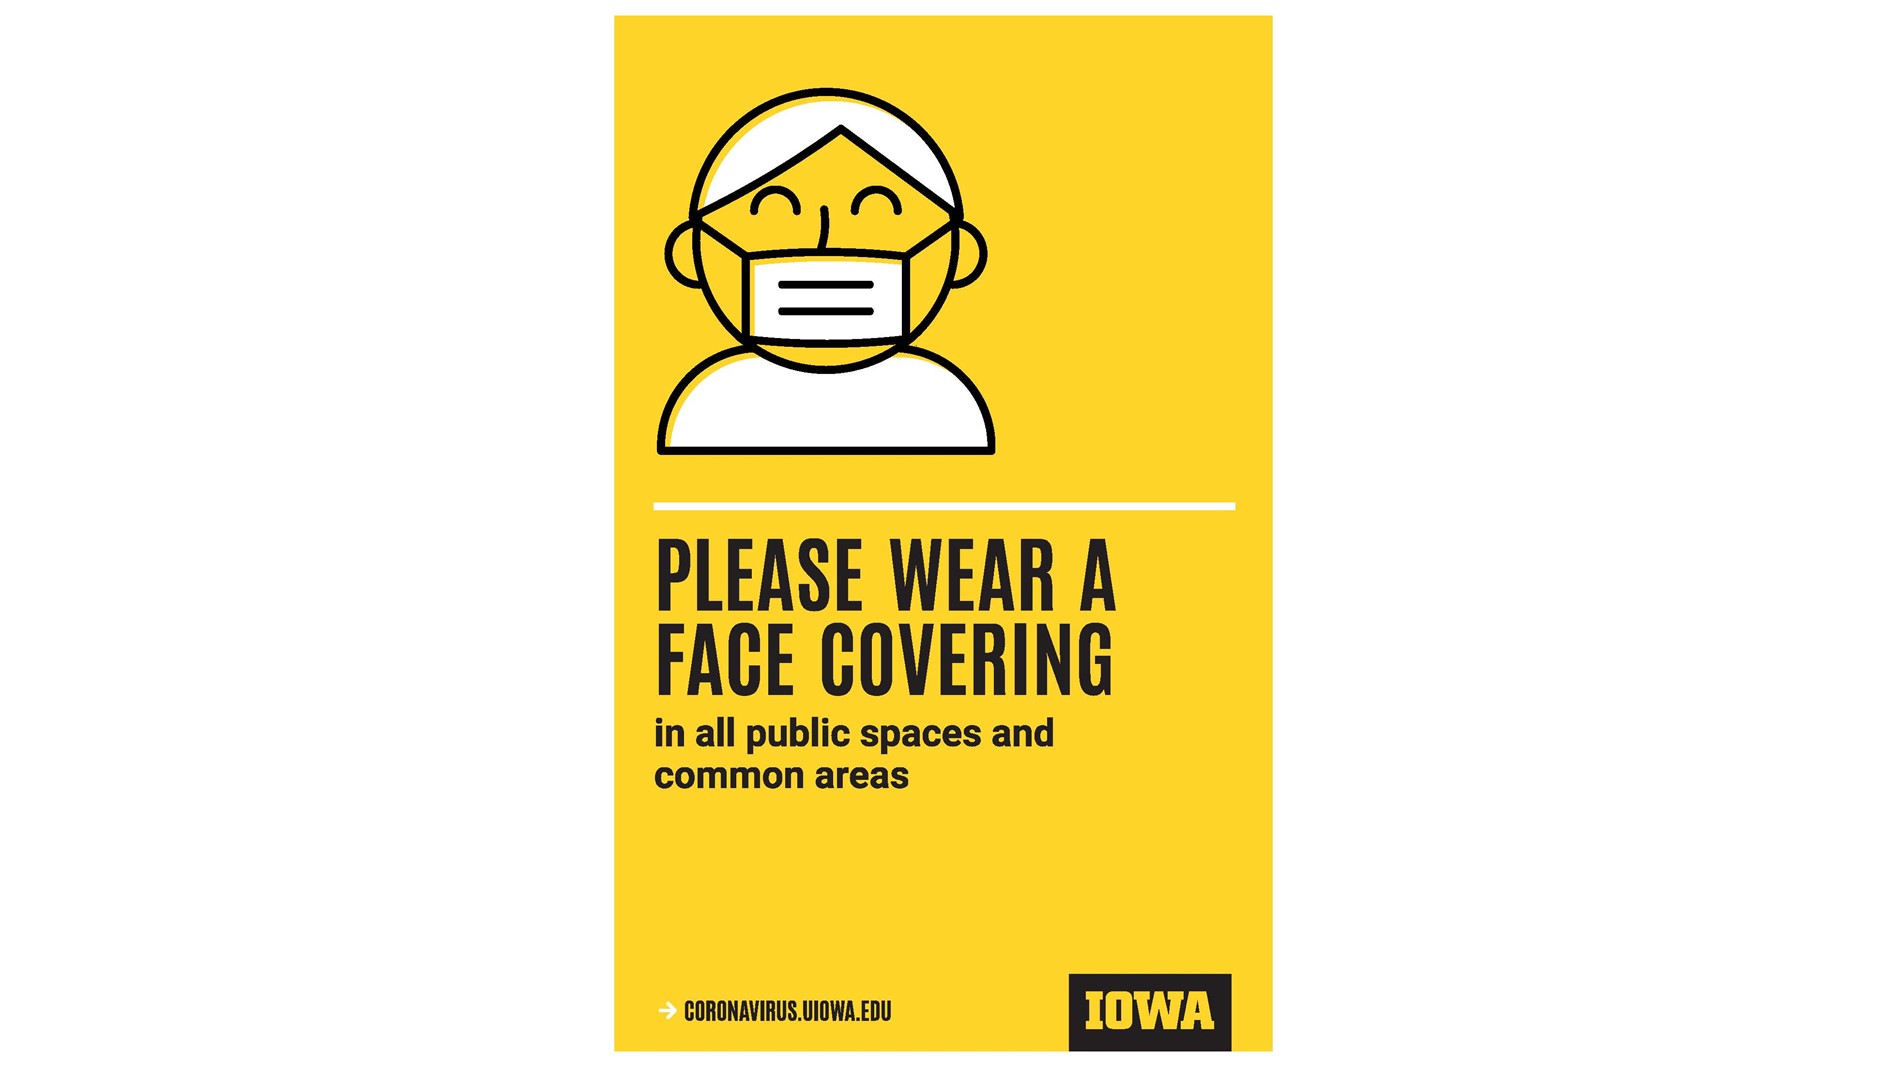 Please wear a face covering